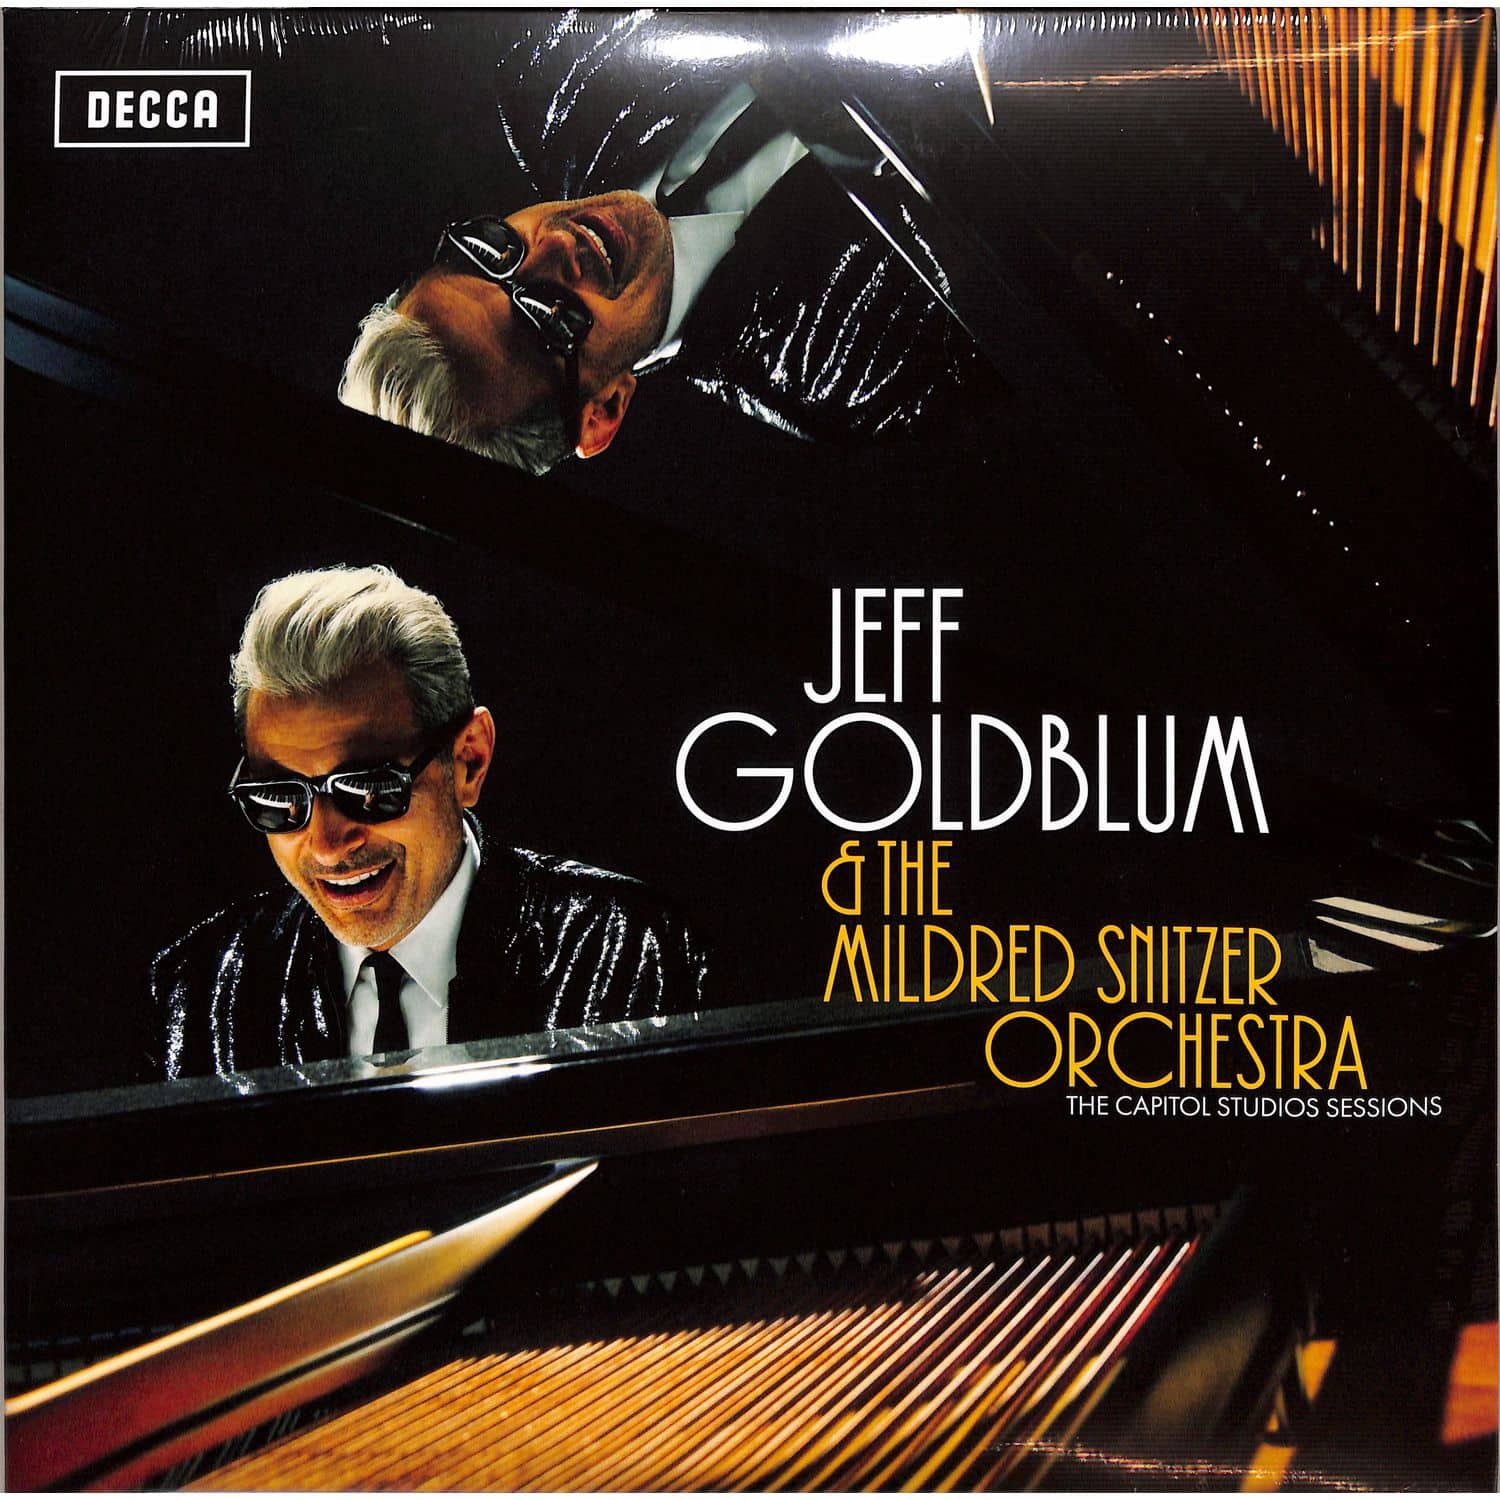 Jeff Goldblum & The Mildred Snitzer Orchestra - THE CAPITOL STUDIO SESSIONS 